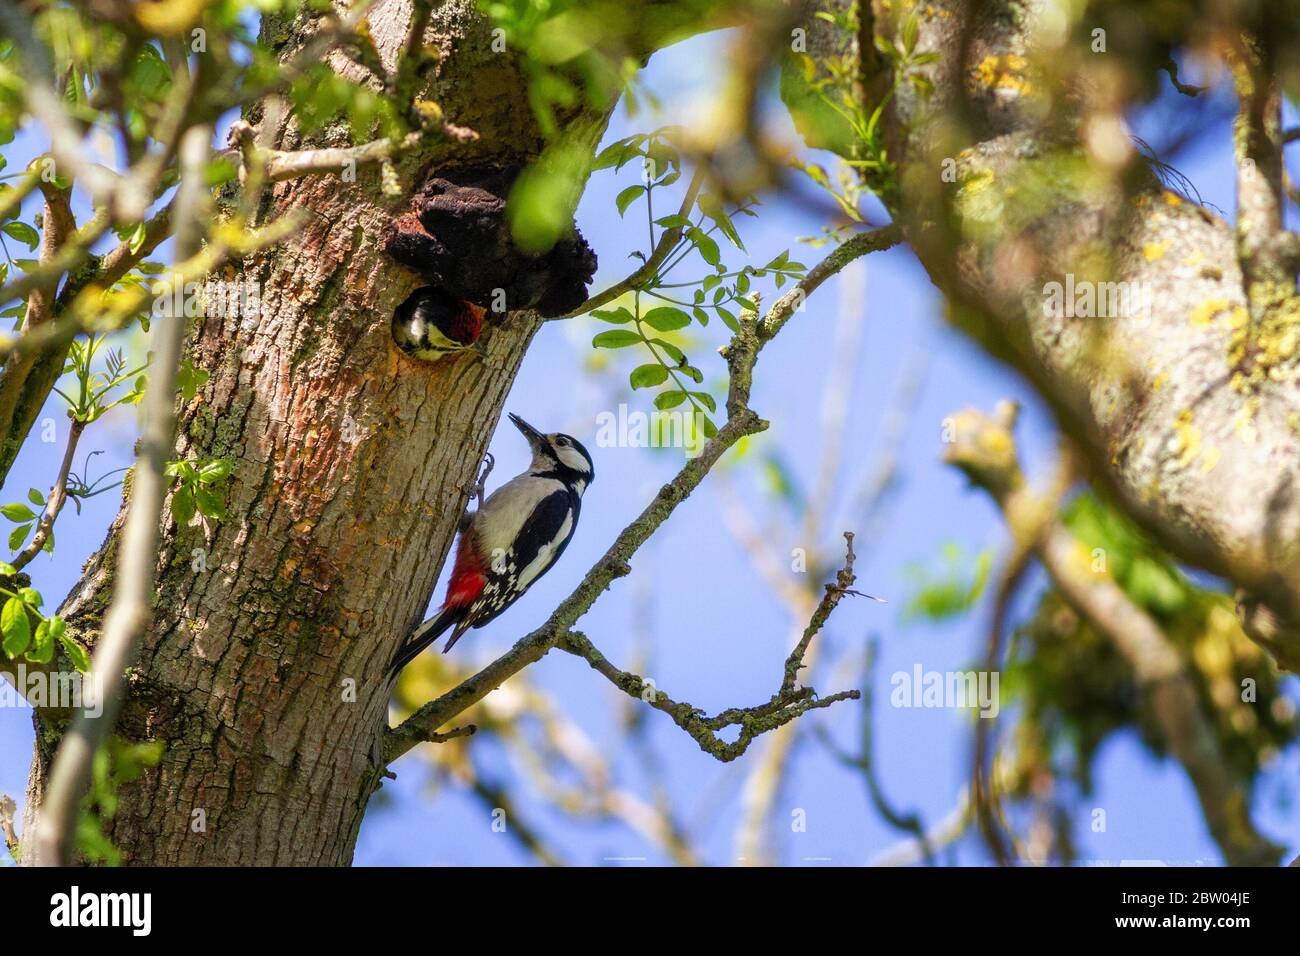 Adult greater spotted woodpecker having just fed its chick in a nesting hole (carefully crafted under a fungus canopy), UK Stock Photo